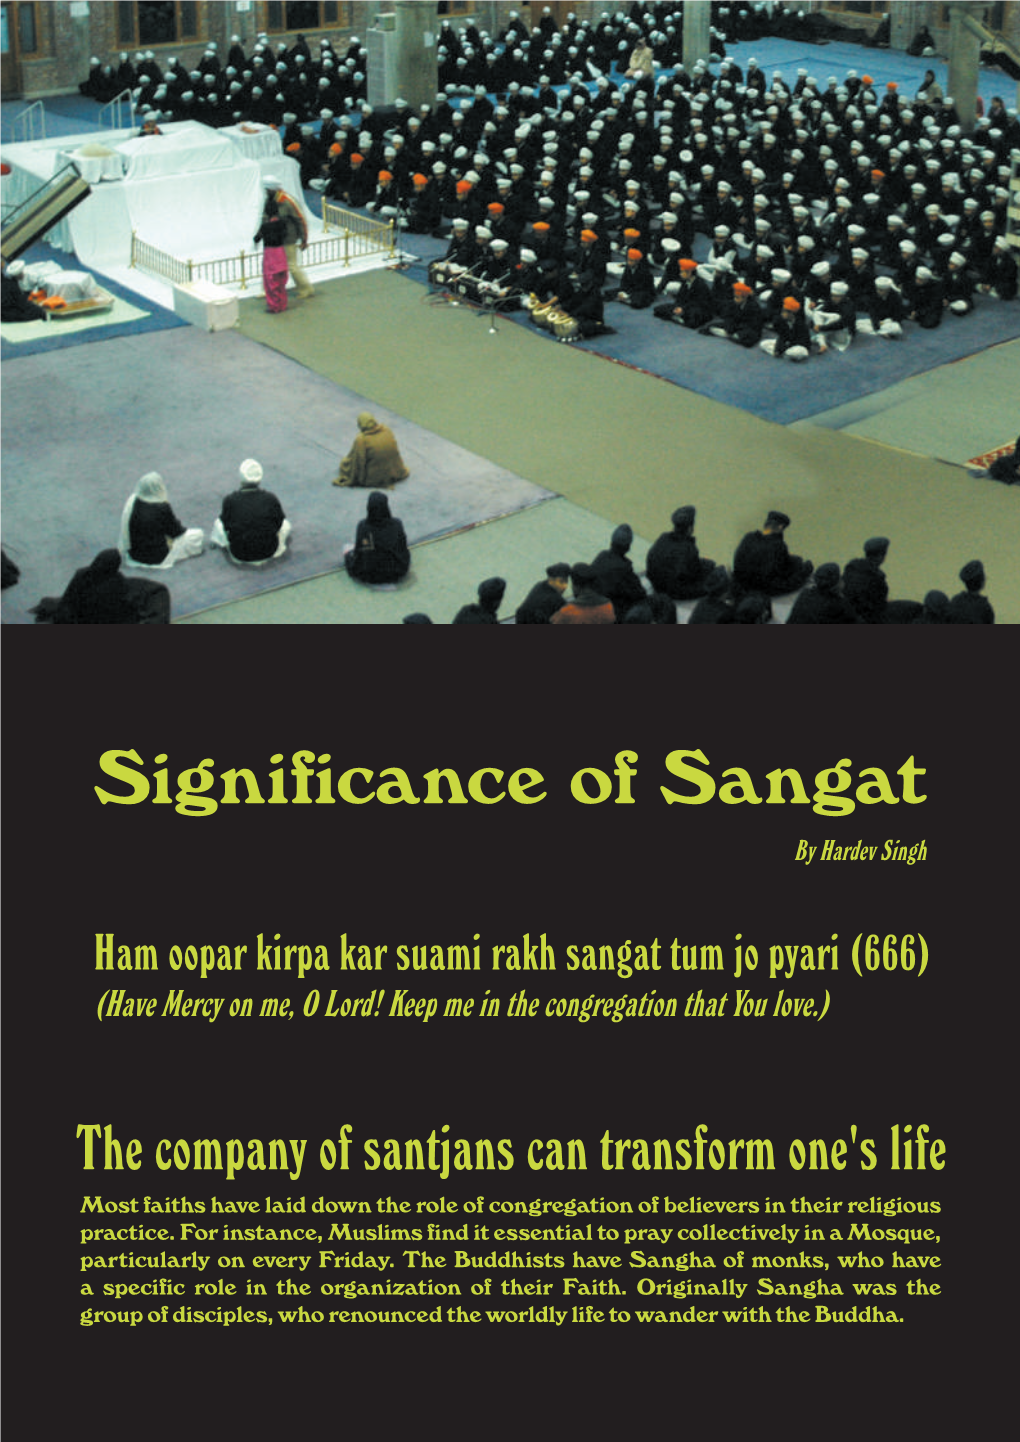 Significance of Saint : Hardev Singh